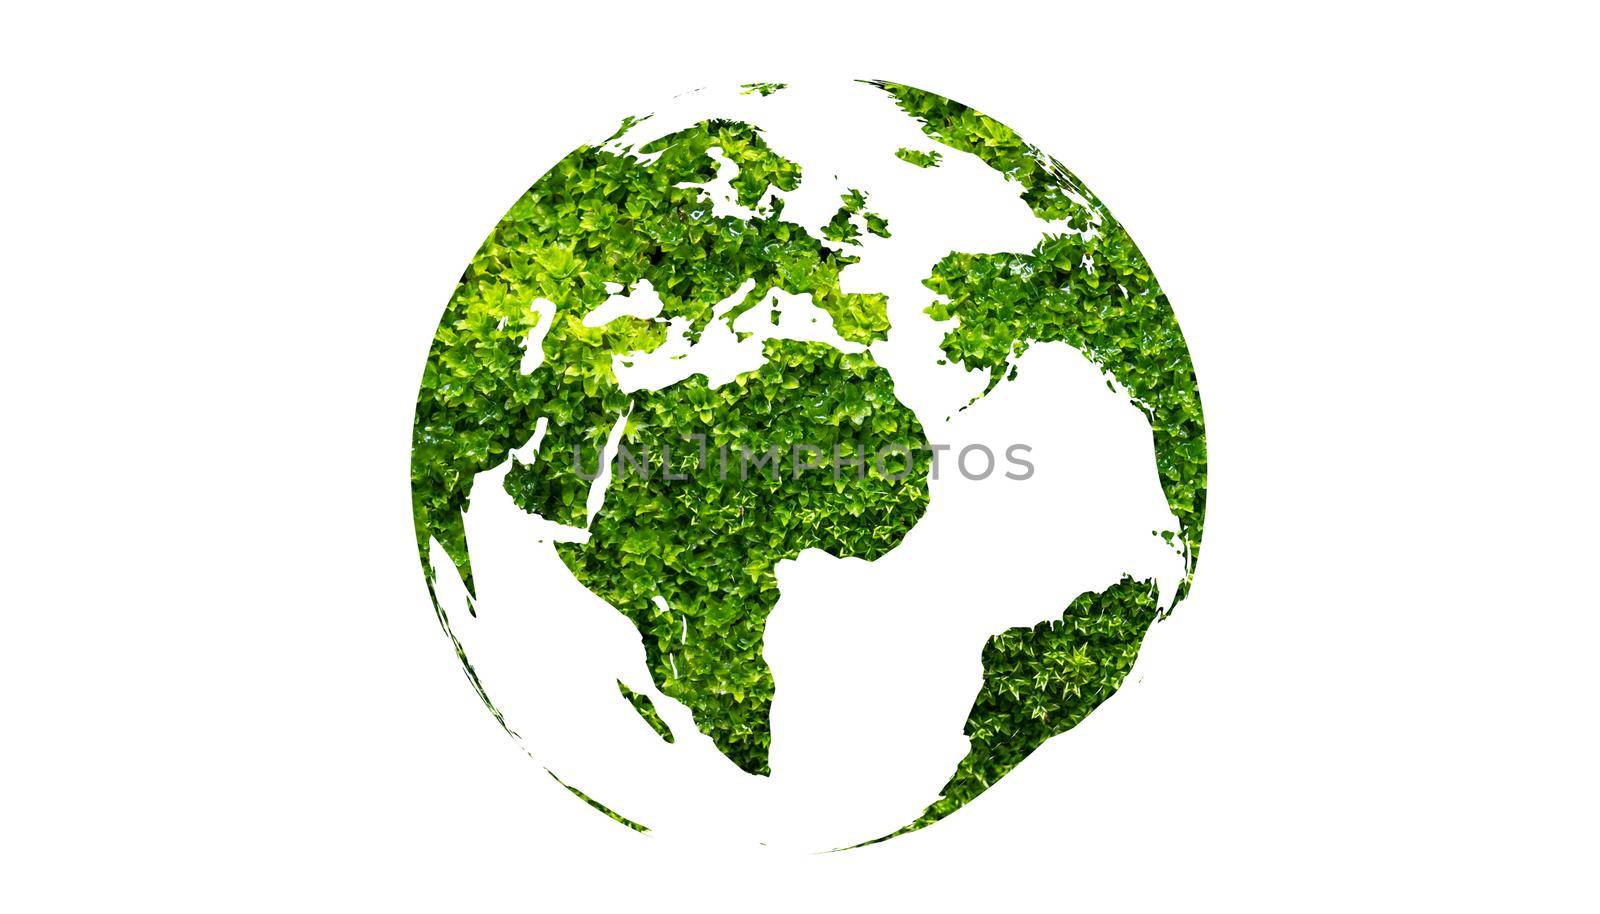 earth day green globe on white isolate background by sarayut_thaneerat